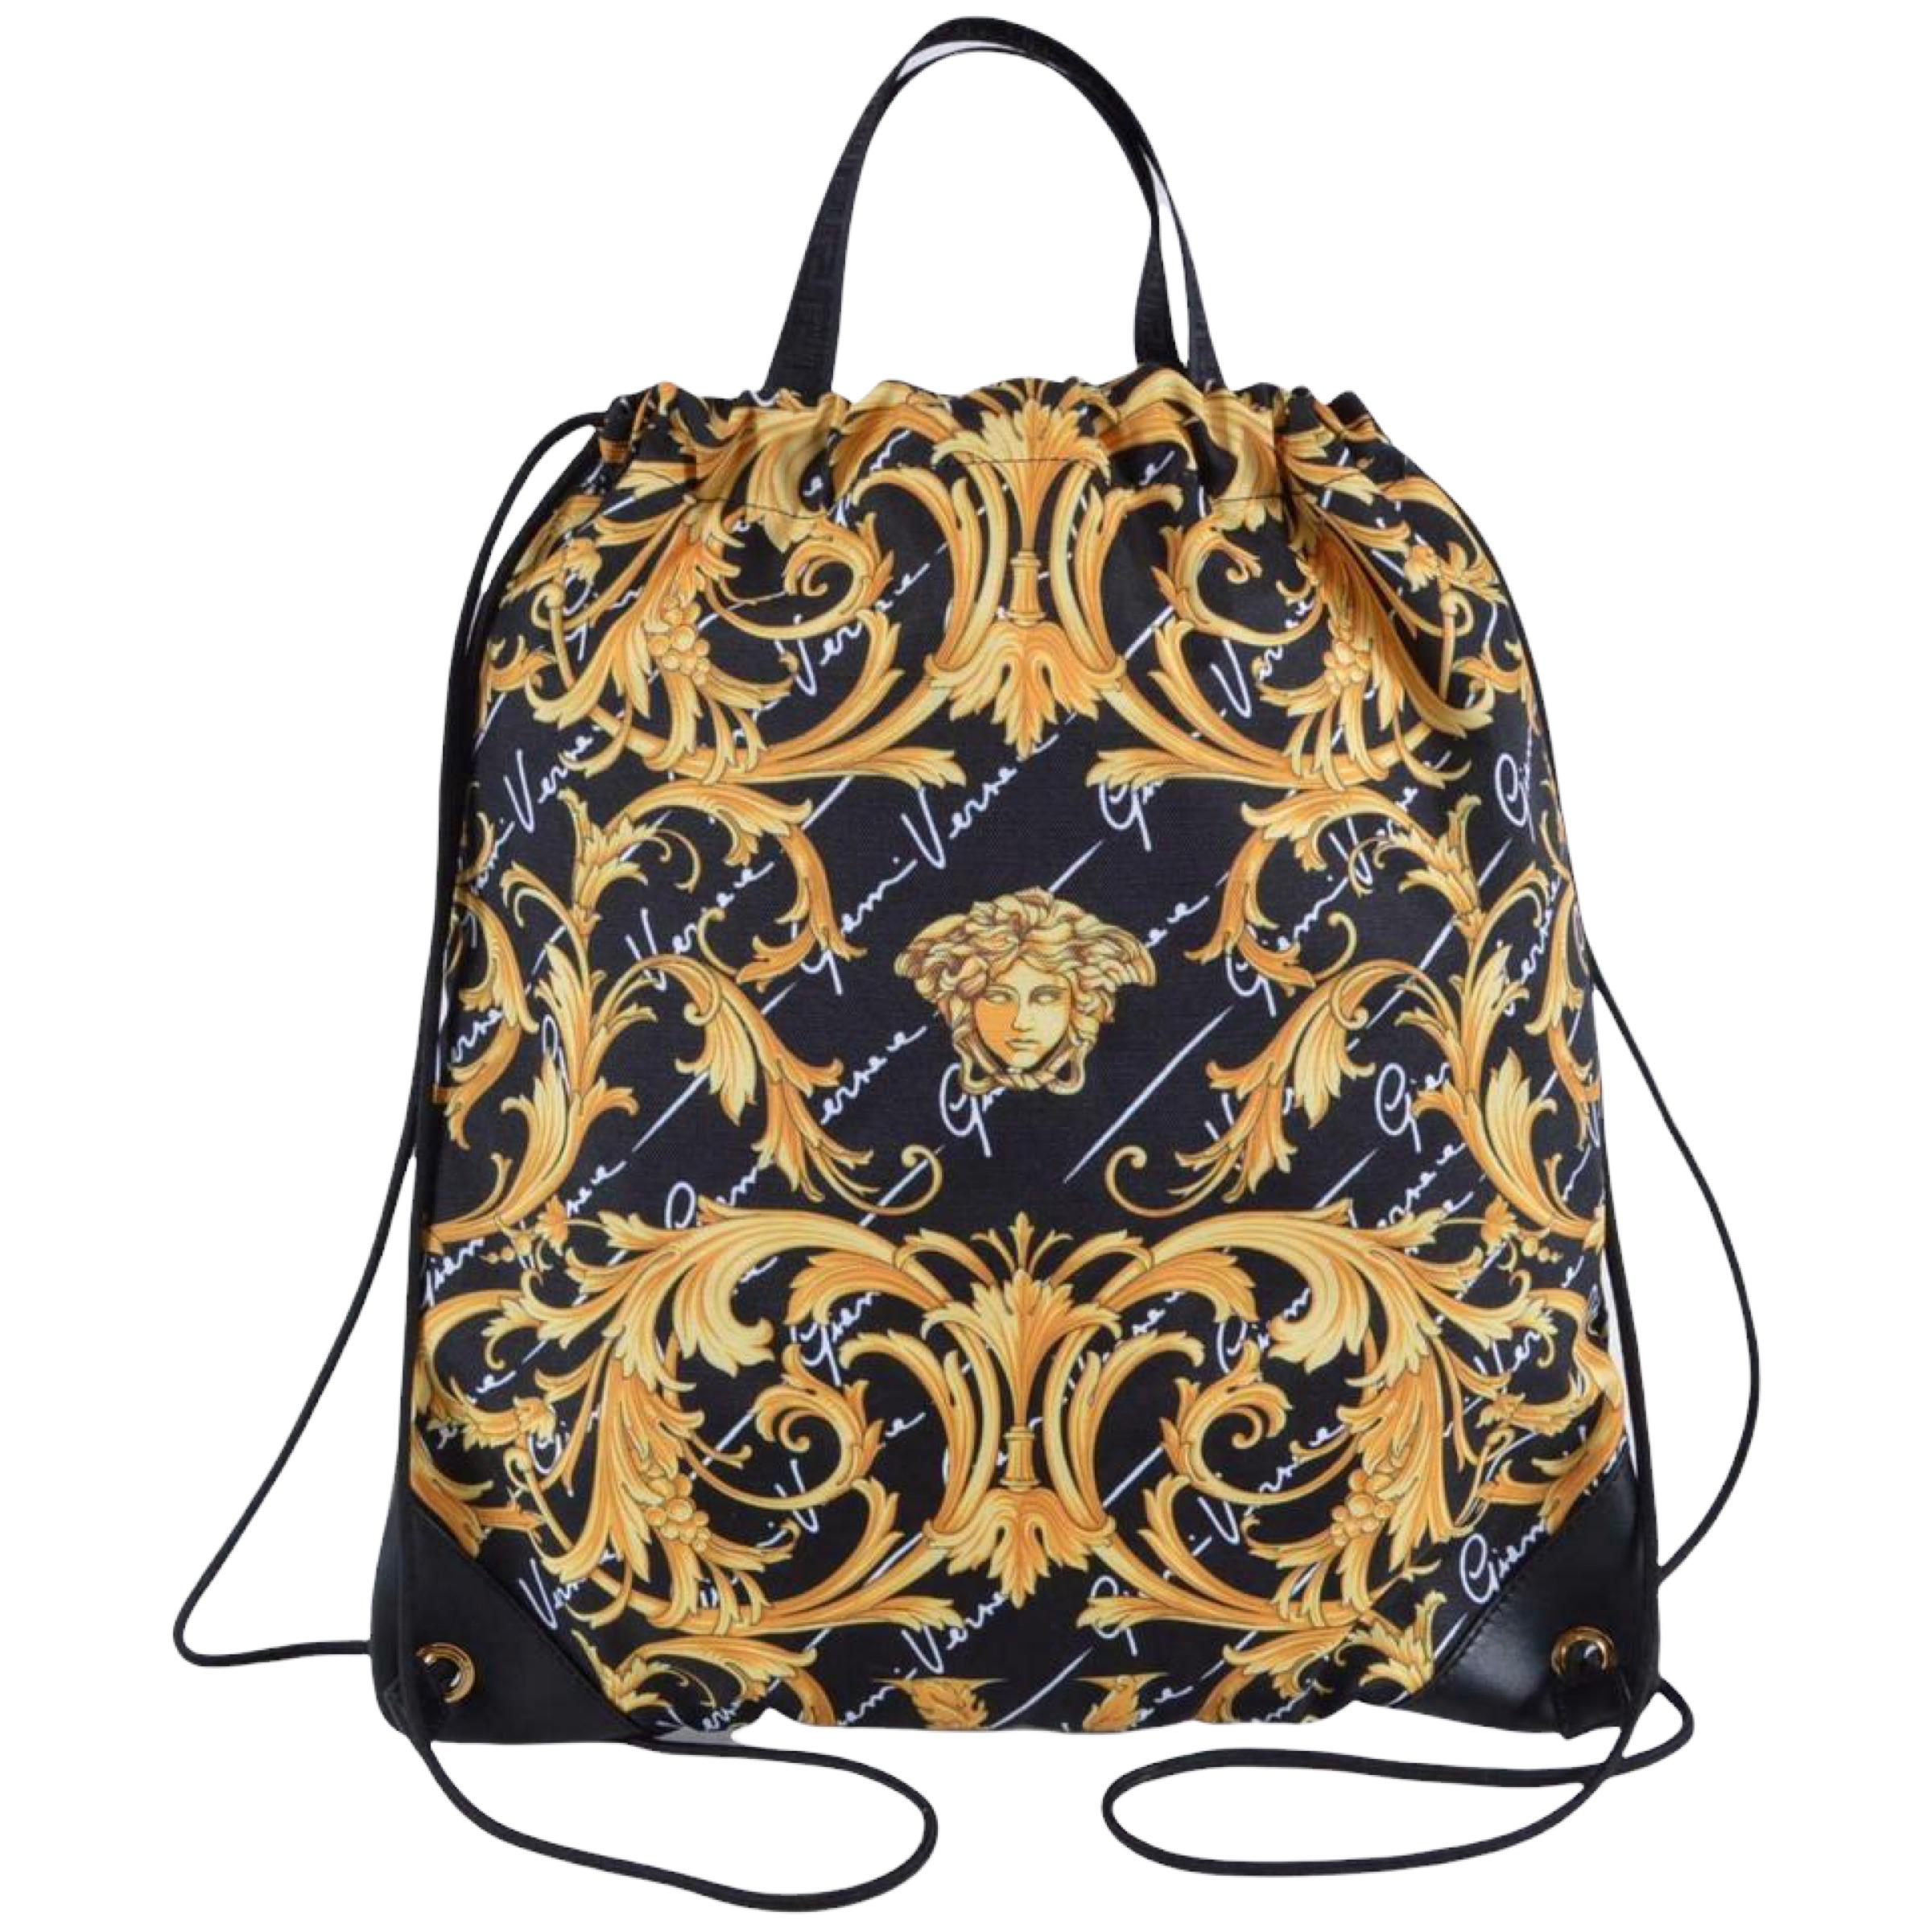 New Versace Black Baroque Medusa Head Drawstring Nylon Backpack Rucksack Bag

Authenticity Guaranteed

DETAILS
Brand: Versace
Condition: Brand new
Gender: Unisex
Category: Backpack
Color: Black
Material: Nylon
Baroque pattern print
Medusa head